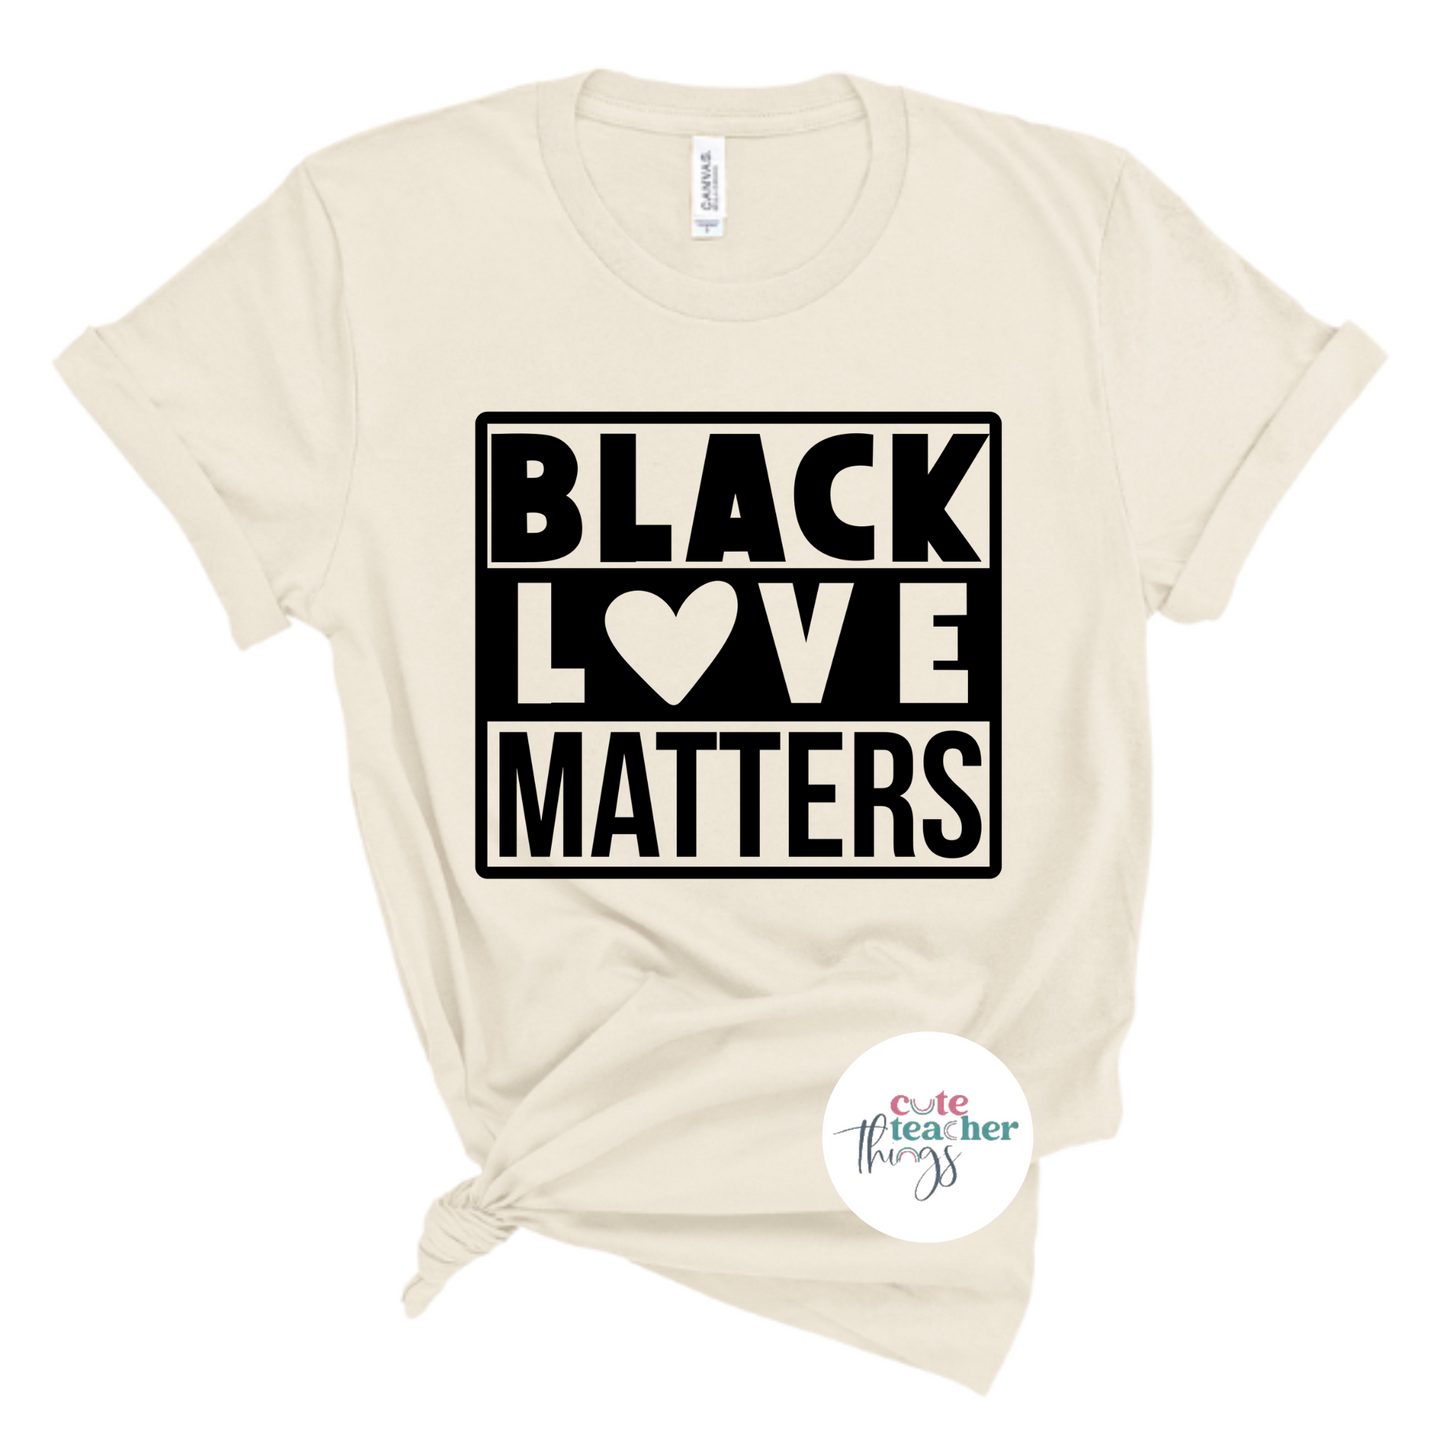 black love matters tee, black couple shirts, valentines day gift